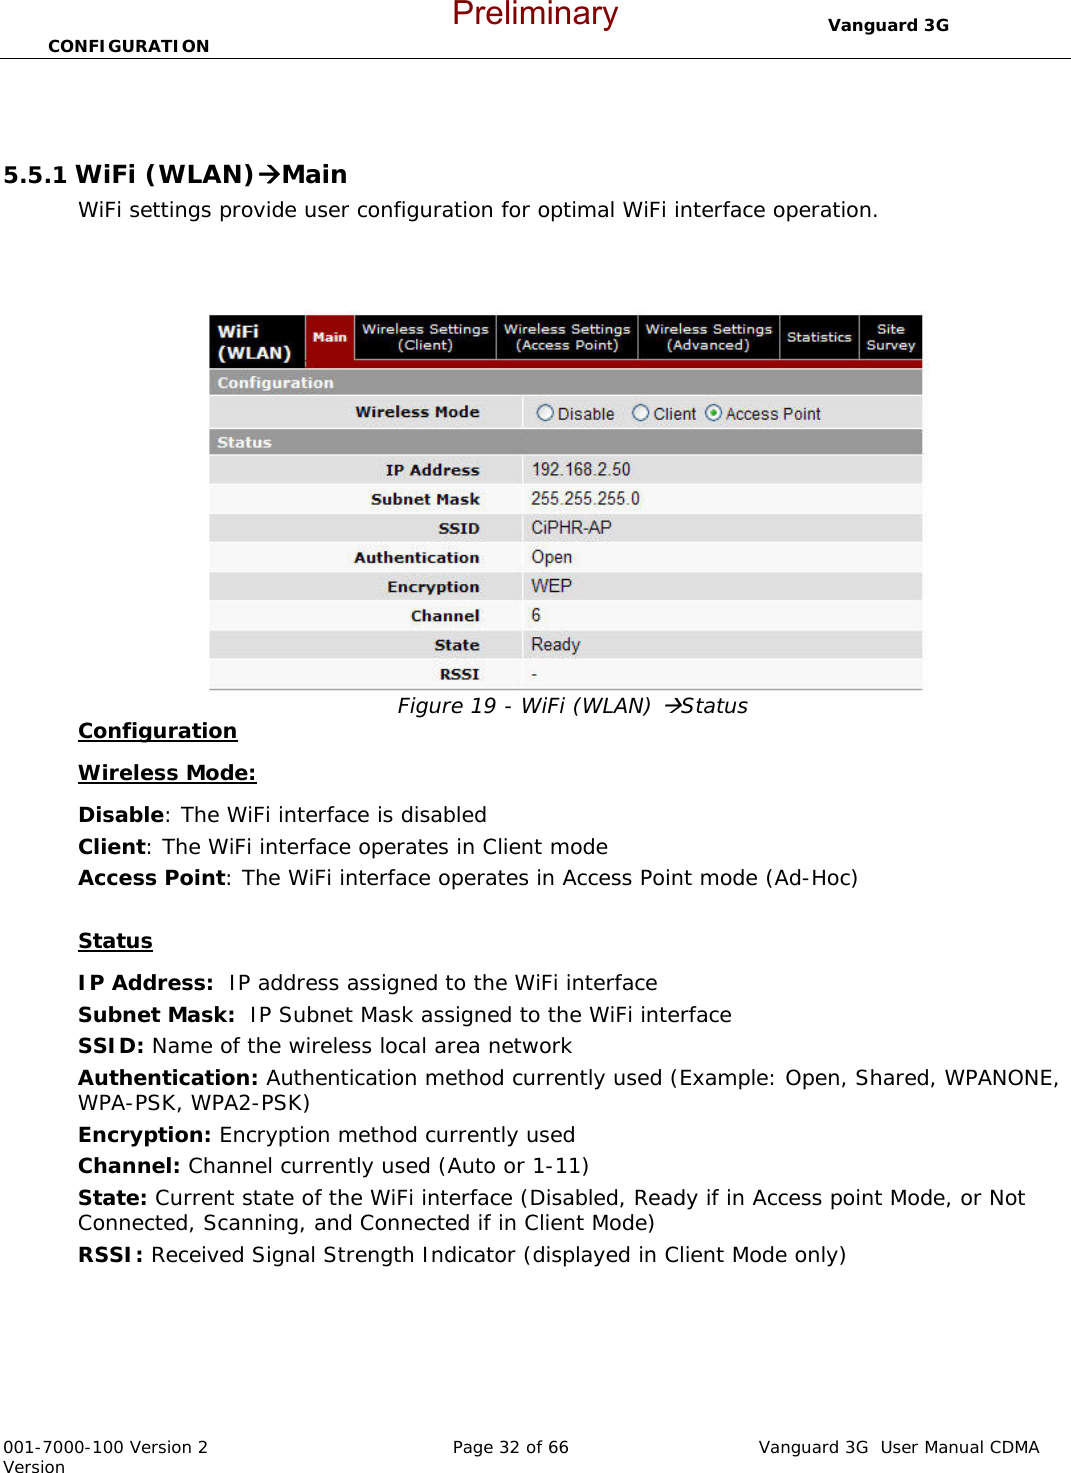                                  Vanguard 3G  CONFIGURATION  001-7000-100 Version 2       Page 32 of 66       Vanguard 3G  User Manual CDMA Version   5.5.1 WiFi (WLAN)ÆMain WiFi settings provide user configuration for optimal WiFi interface operation.    Figure 19 - WiFi (WLAN) ÆStatus Configuration Wireless Mode:  Disable: The WiFi interface is disabled Client: The WiFi interface operates in Client mode Access Point: The WiFi interface operates in Access Point mode (Ad-Hoc)  Status IP Address:  IP address assigned to the WiFi interface  Subnet Mask:  IP Subnet Mask assigned to the WiFi interface  SSID: Name of the wireless local area network Authentication: Authentication method currently used (Example: Open, Shared, WPANONE, WPA-PSK, WPA2-PSK) Encryption: Encryption method currently used  Channel: Channel currently used (Auto or 1-11) State: Current state of the WiFi interface (Disabled, Ready if in Access point Mode, or Not Connected, Scanning, and Connected if in Client Mode) RSSI: Received Signal Strength Indicator (displayed in Client Mode only)   Preliminary